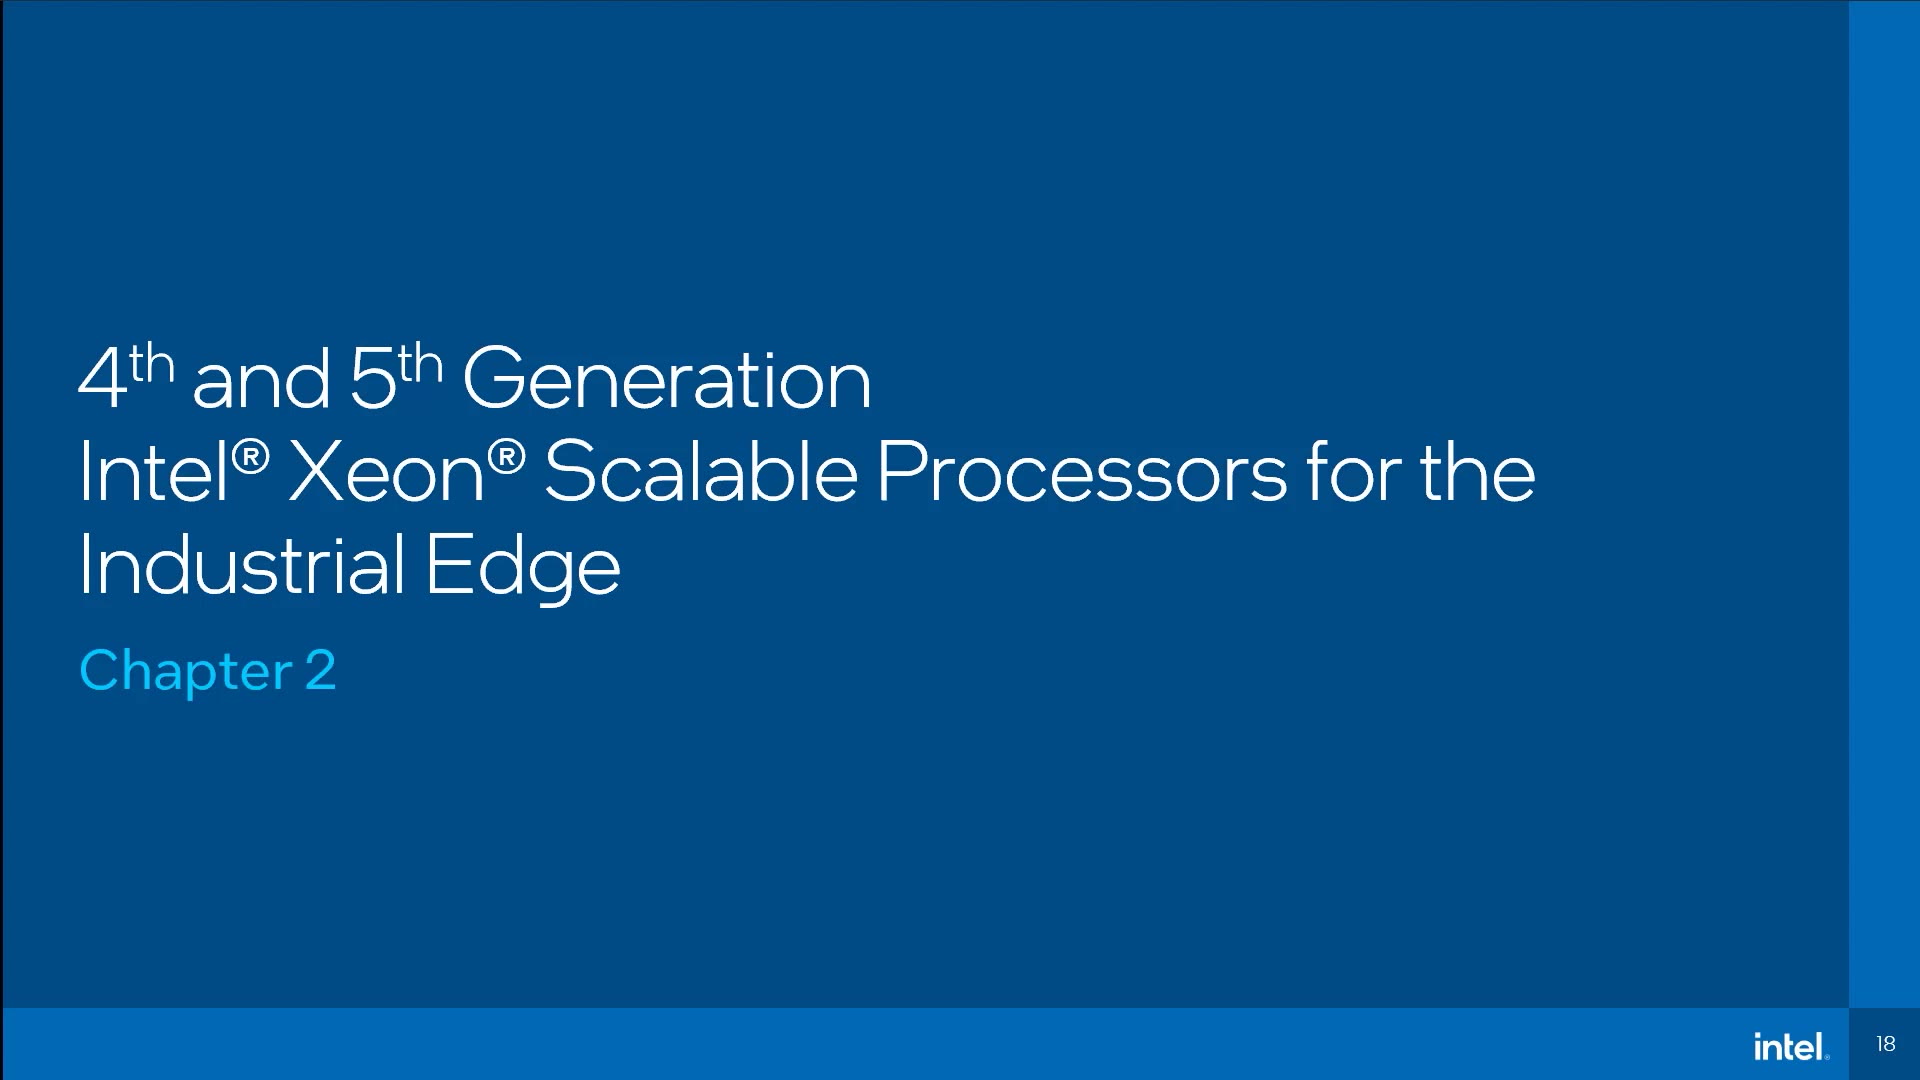 4th and 5th Generation ​ Intel® Xeon® Scalable Processors ​for the Industrial Edge